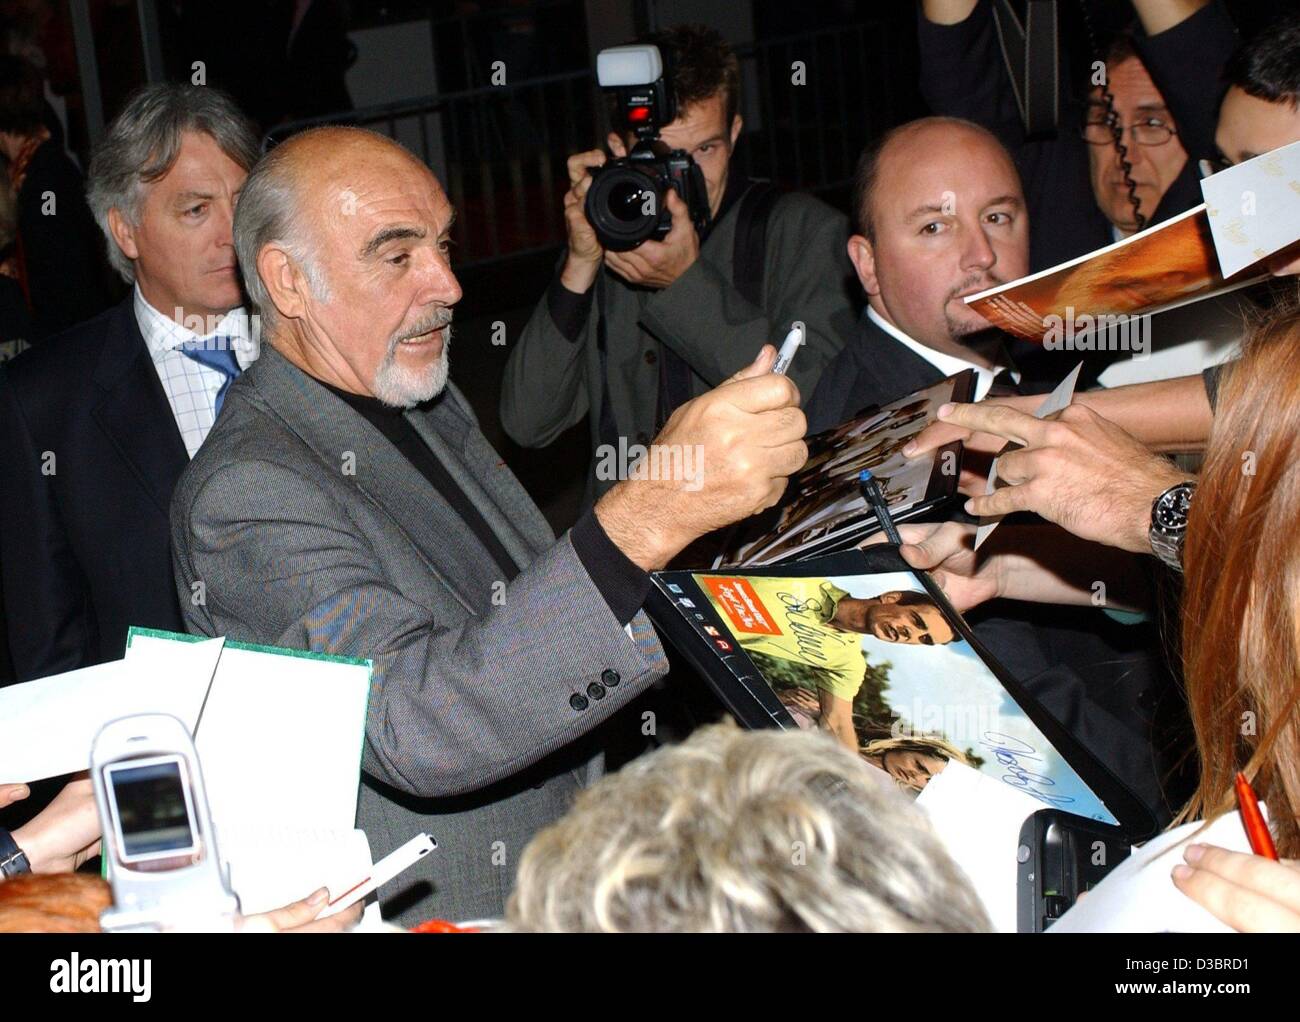 (dpa) - The Scottisch actor Sir Sean Connery ('James Bond', 'Name of the rose', 'The Rock', 'Finding Forrester') gives autographs at the premiere of his new film 'The Legue of Extraordinary Gentlemen' in Berlin, Germany, 30 September 2003. Numerous VIPs showed up at the event in the cinema 'Cosmos'. Stock Photo